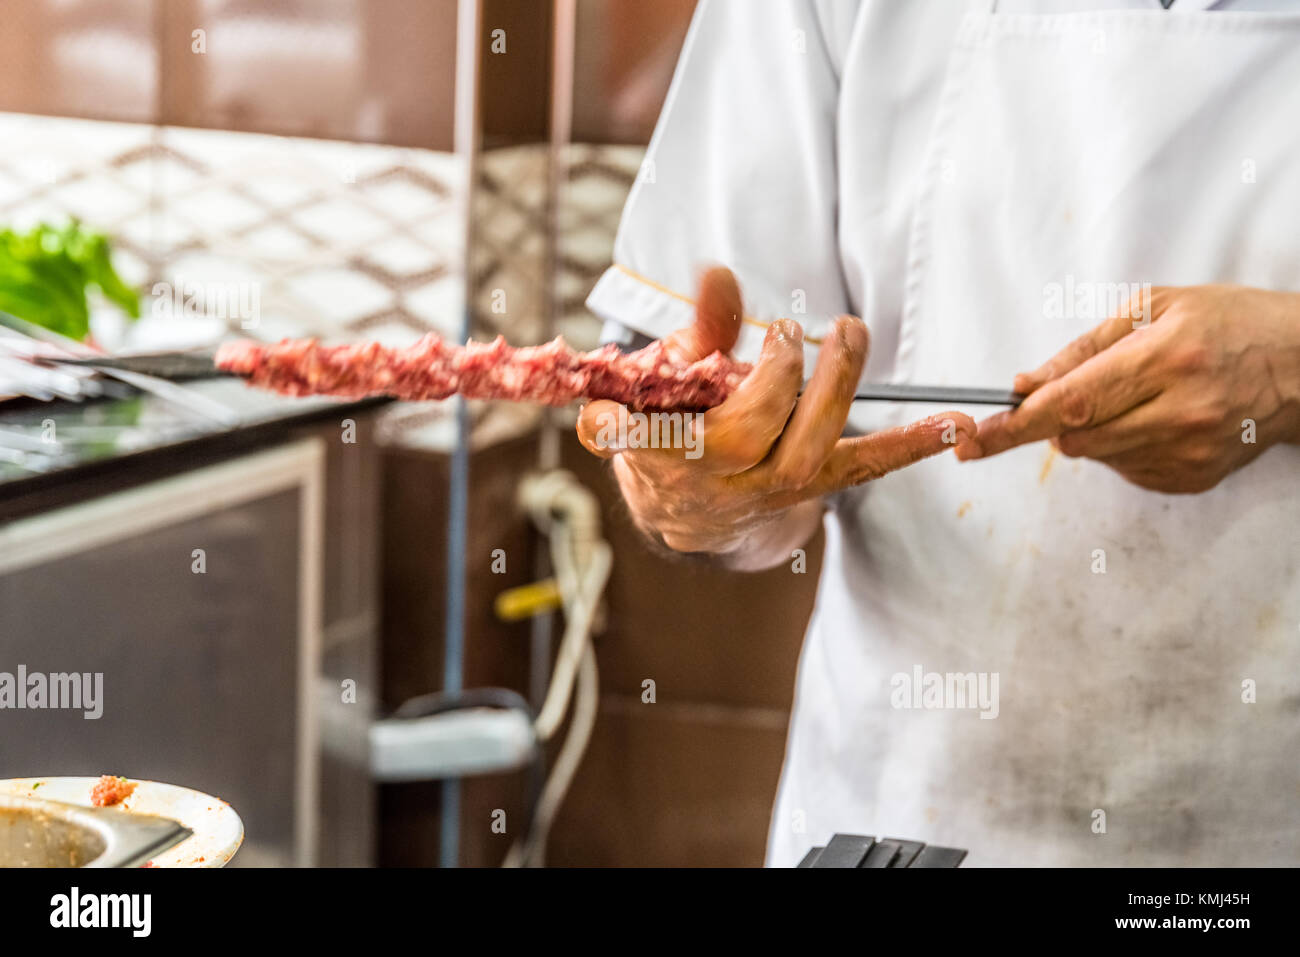 Kayako MNL - Shish is a Turkish word meaning to skewer.